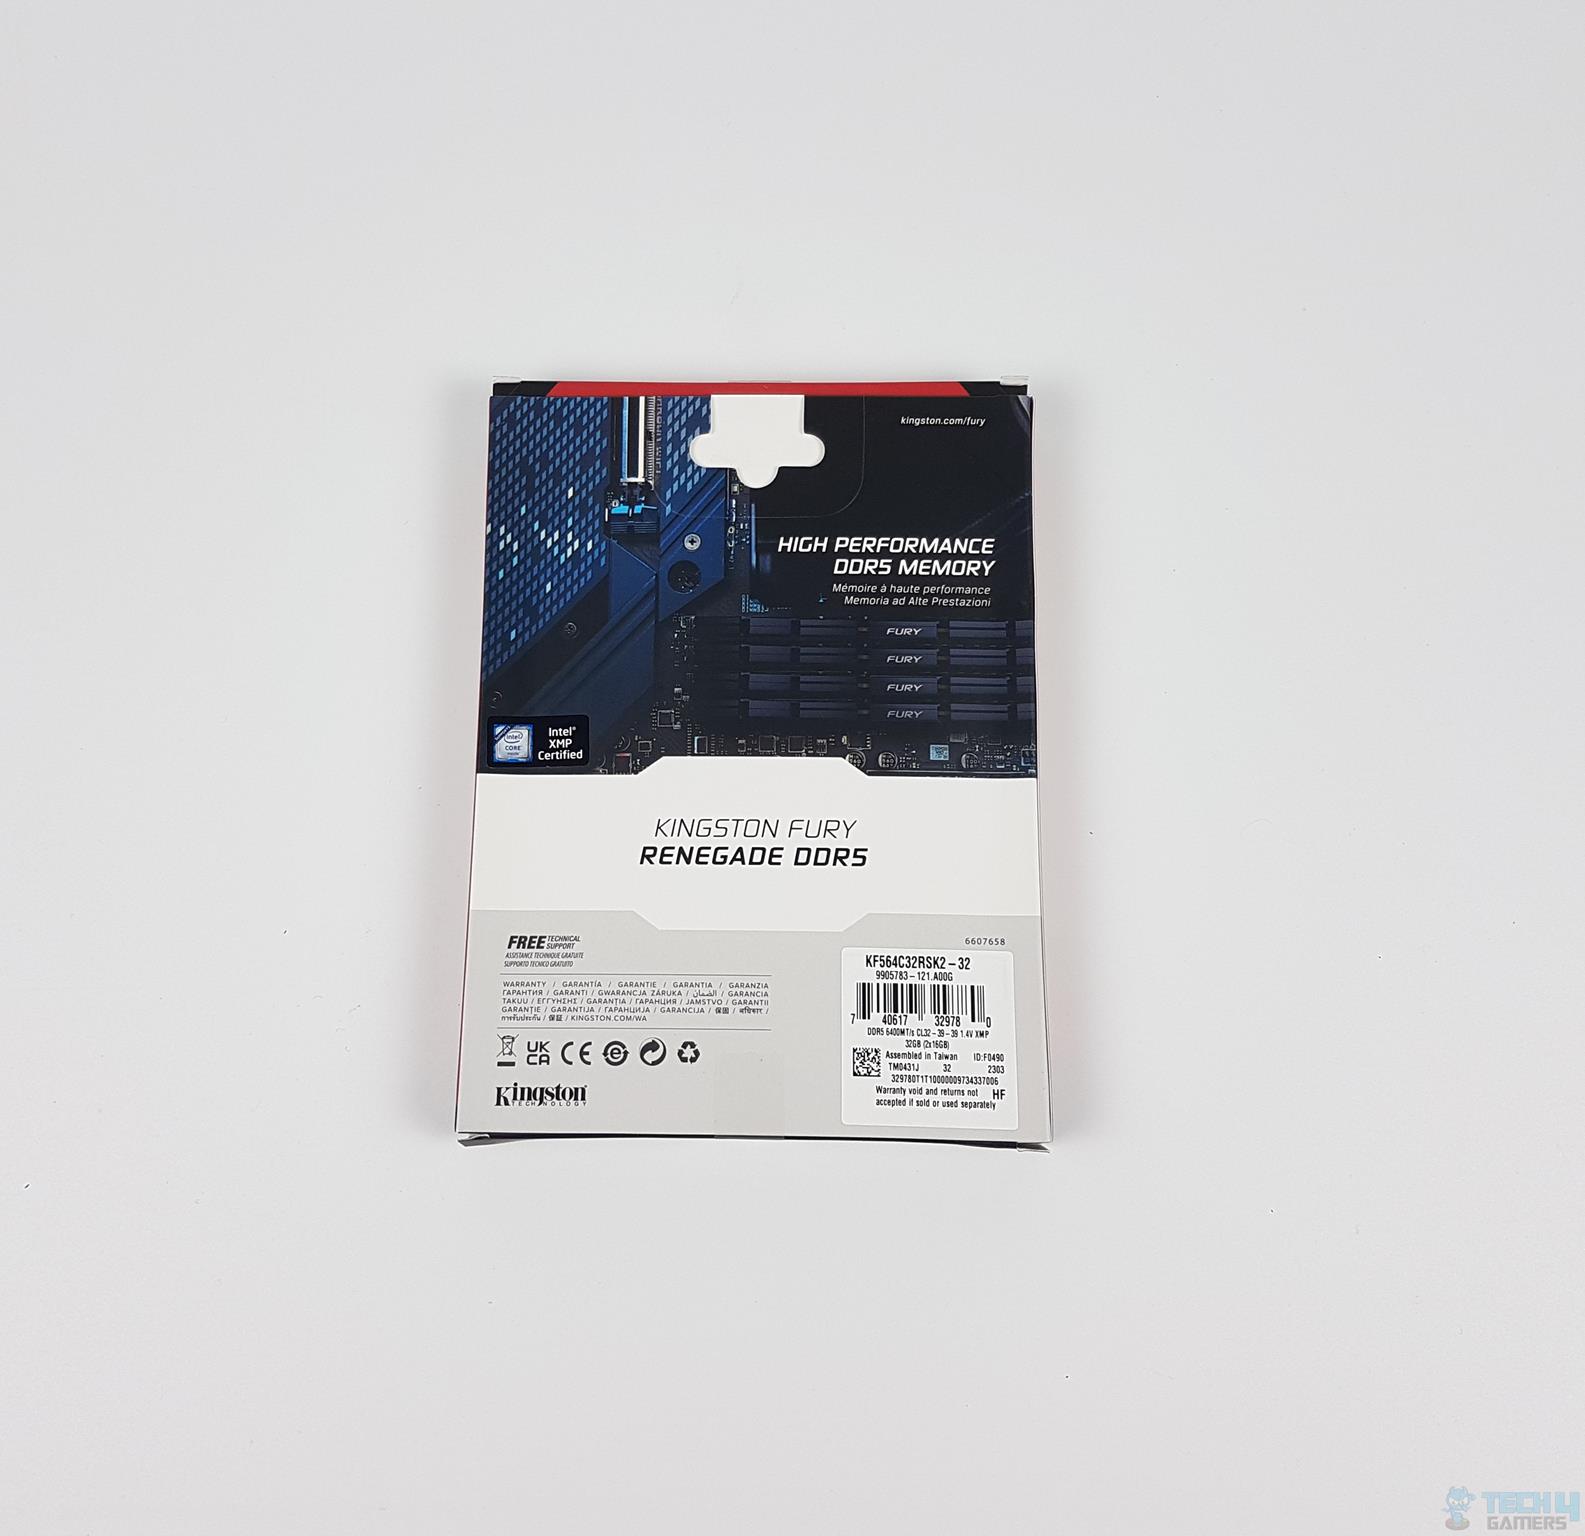 Kingston Fury Renegade 6400MT/s CL32 32GB DDR5 Kit — The backside of the box